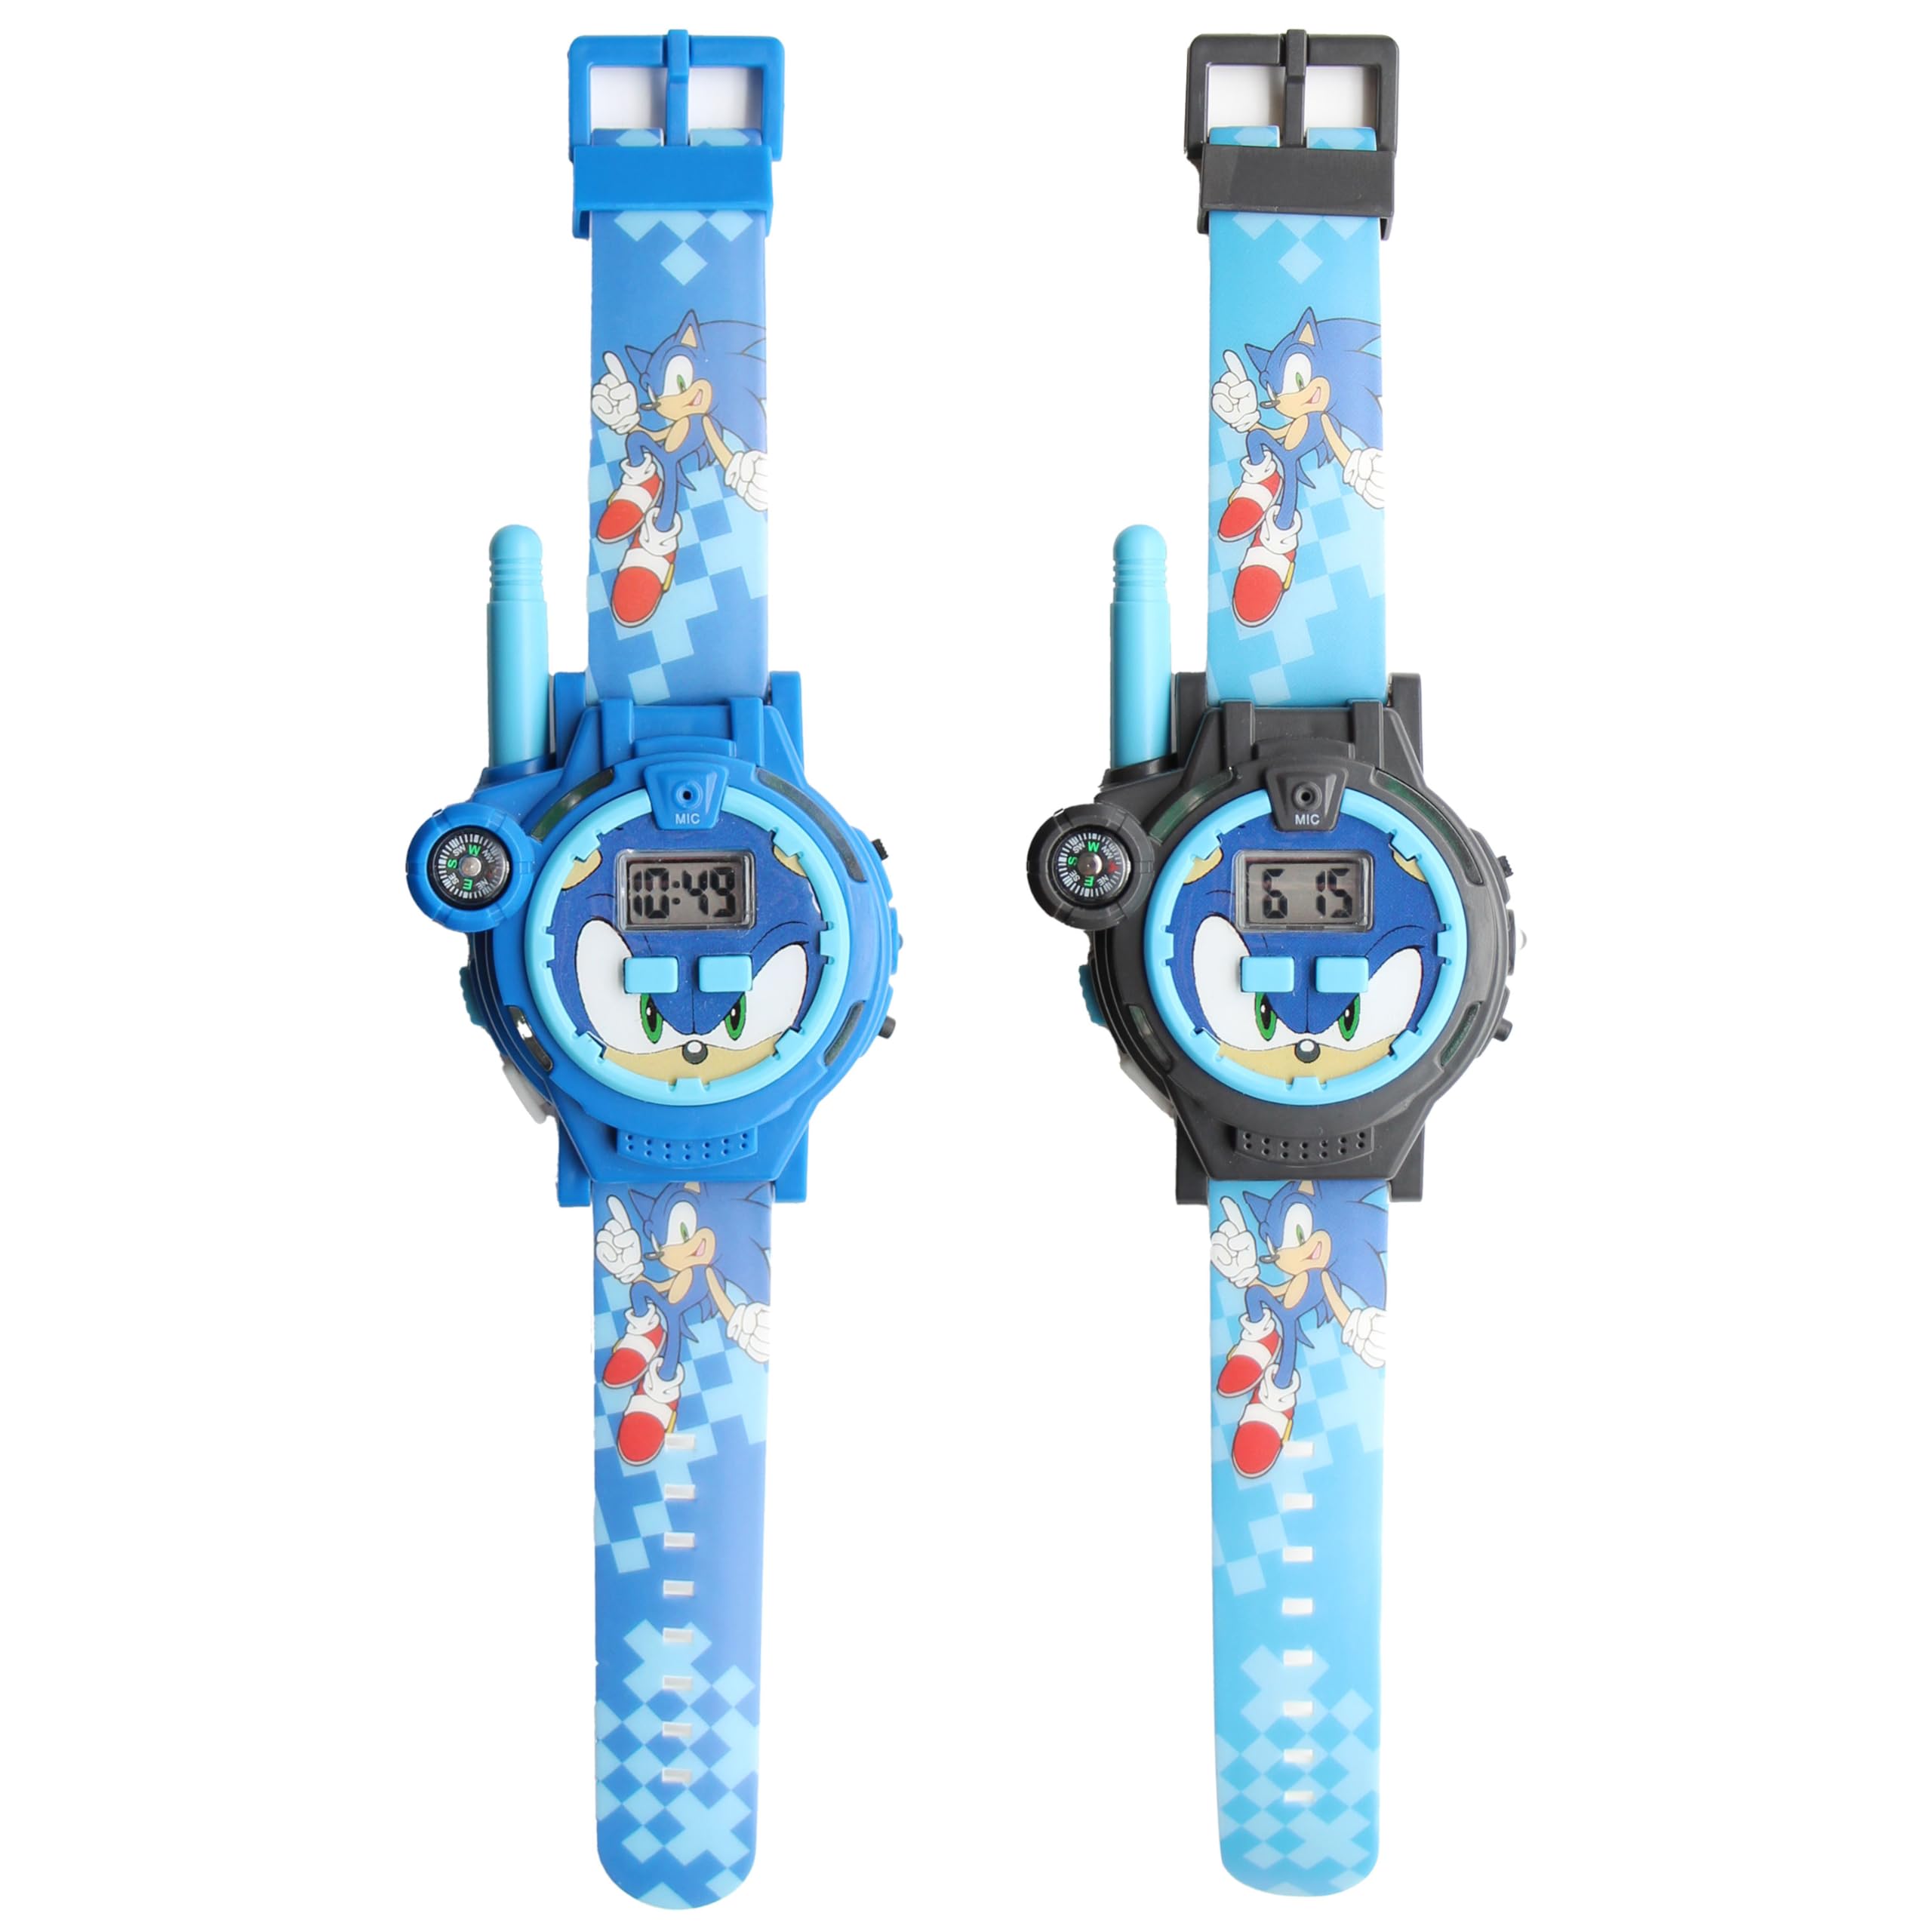 Accutime Sonic Walkie Talkie Blue Educational Digital Kids Watch Set of 2 -Toy with Multicolor Strap for Girls, Boys, Toddlers, 200 Meter Long Range Children's Watch (Model: SNC40094AZ)